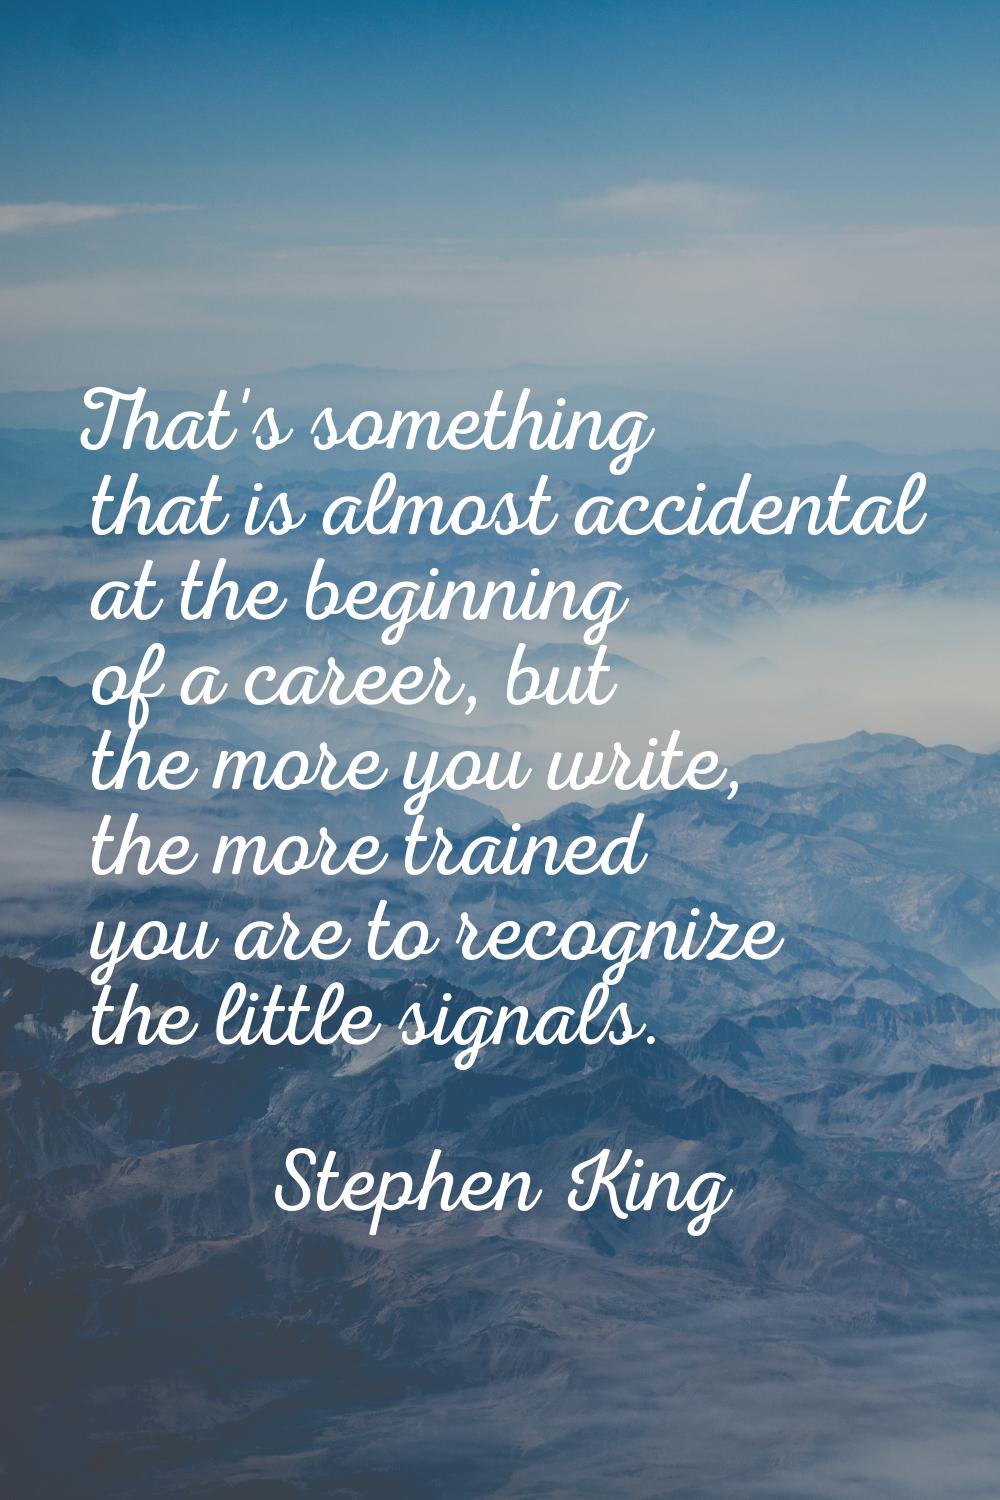 That's something that is almost accidental at the beginning of a career, but the more you write, th